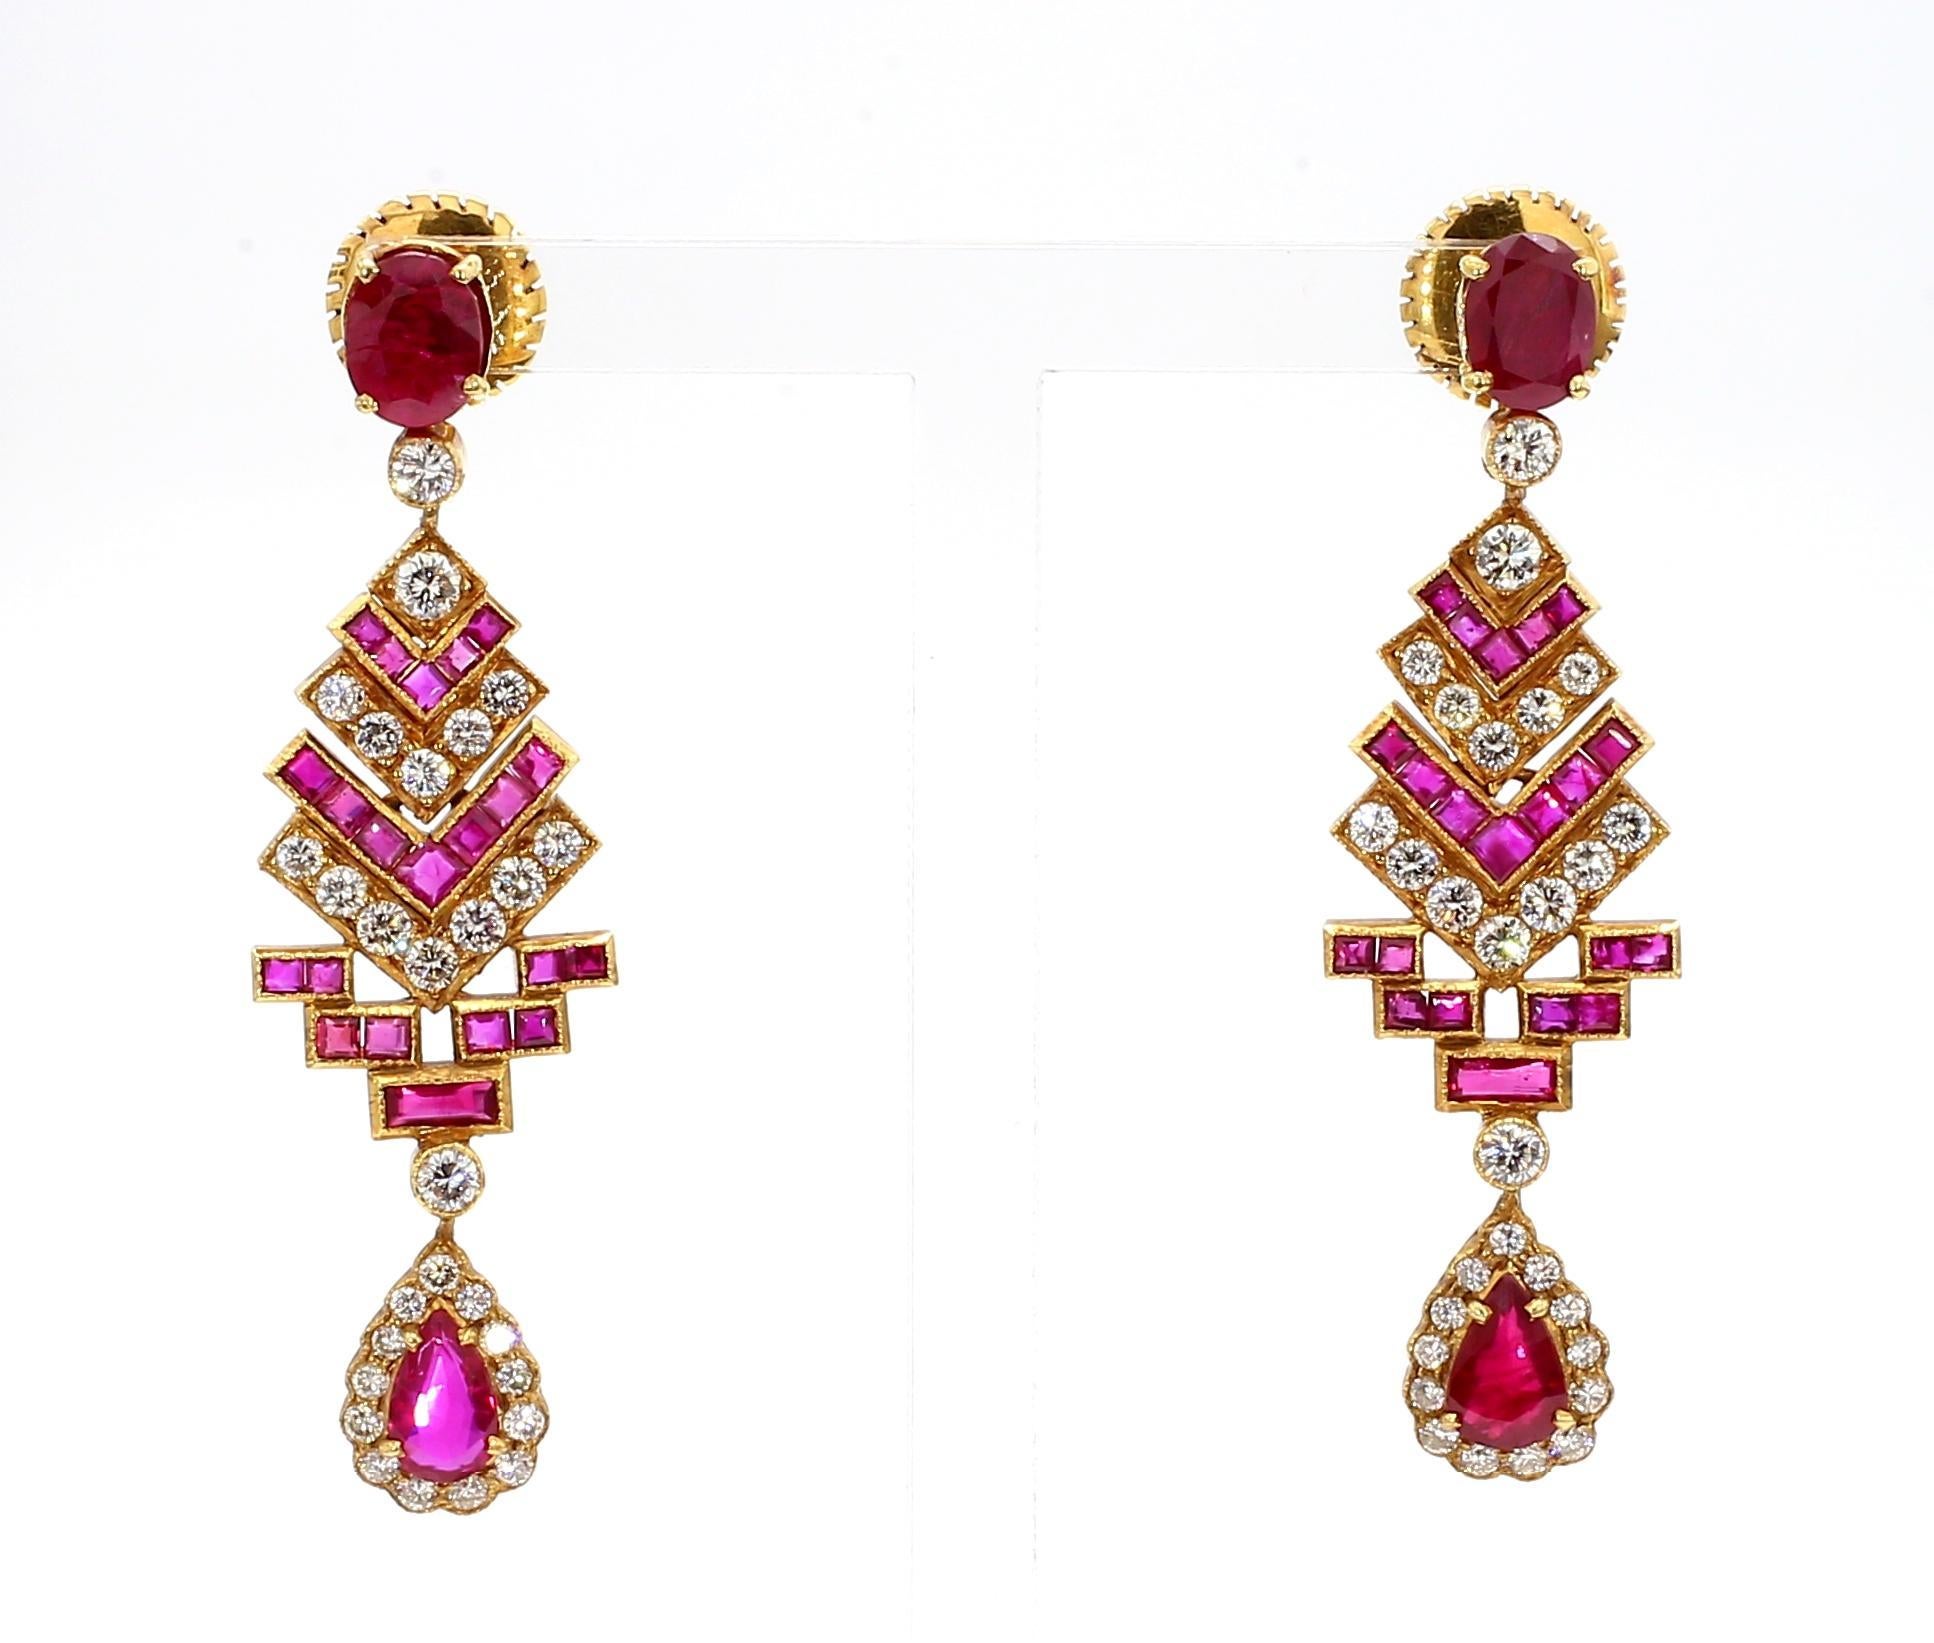 4 Carat Ruby and 3 Carat Diamond Art Deco Style 14K Earrings For Sale 4